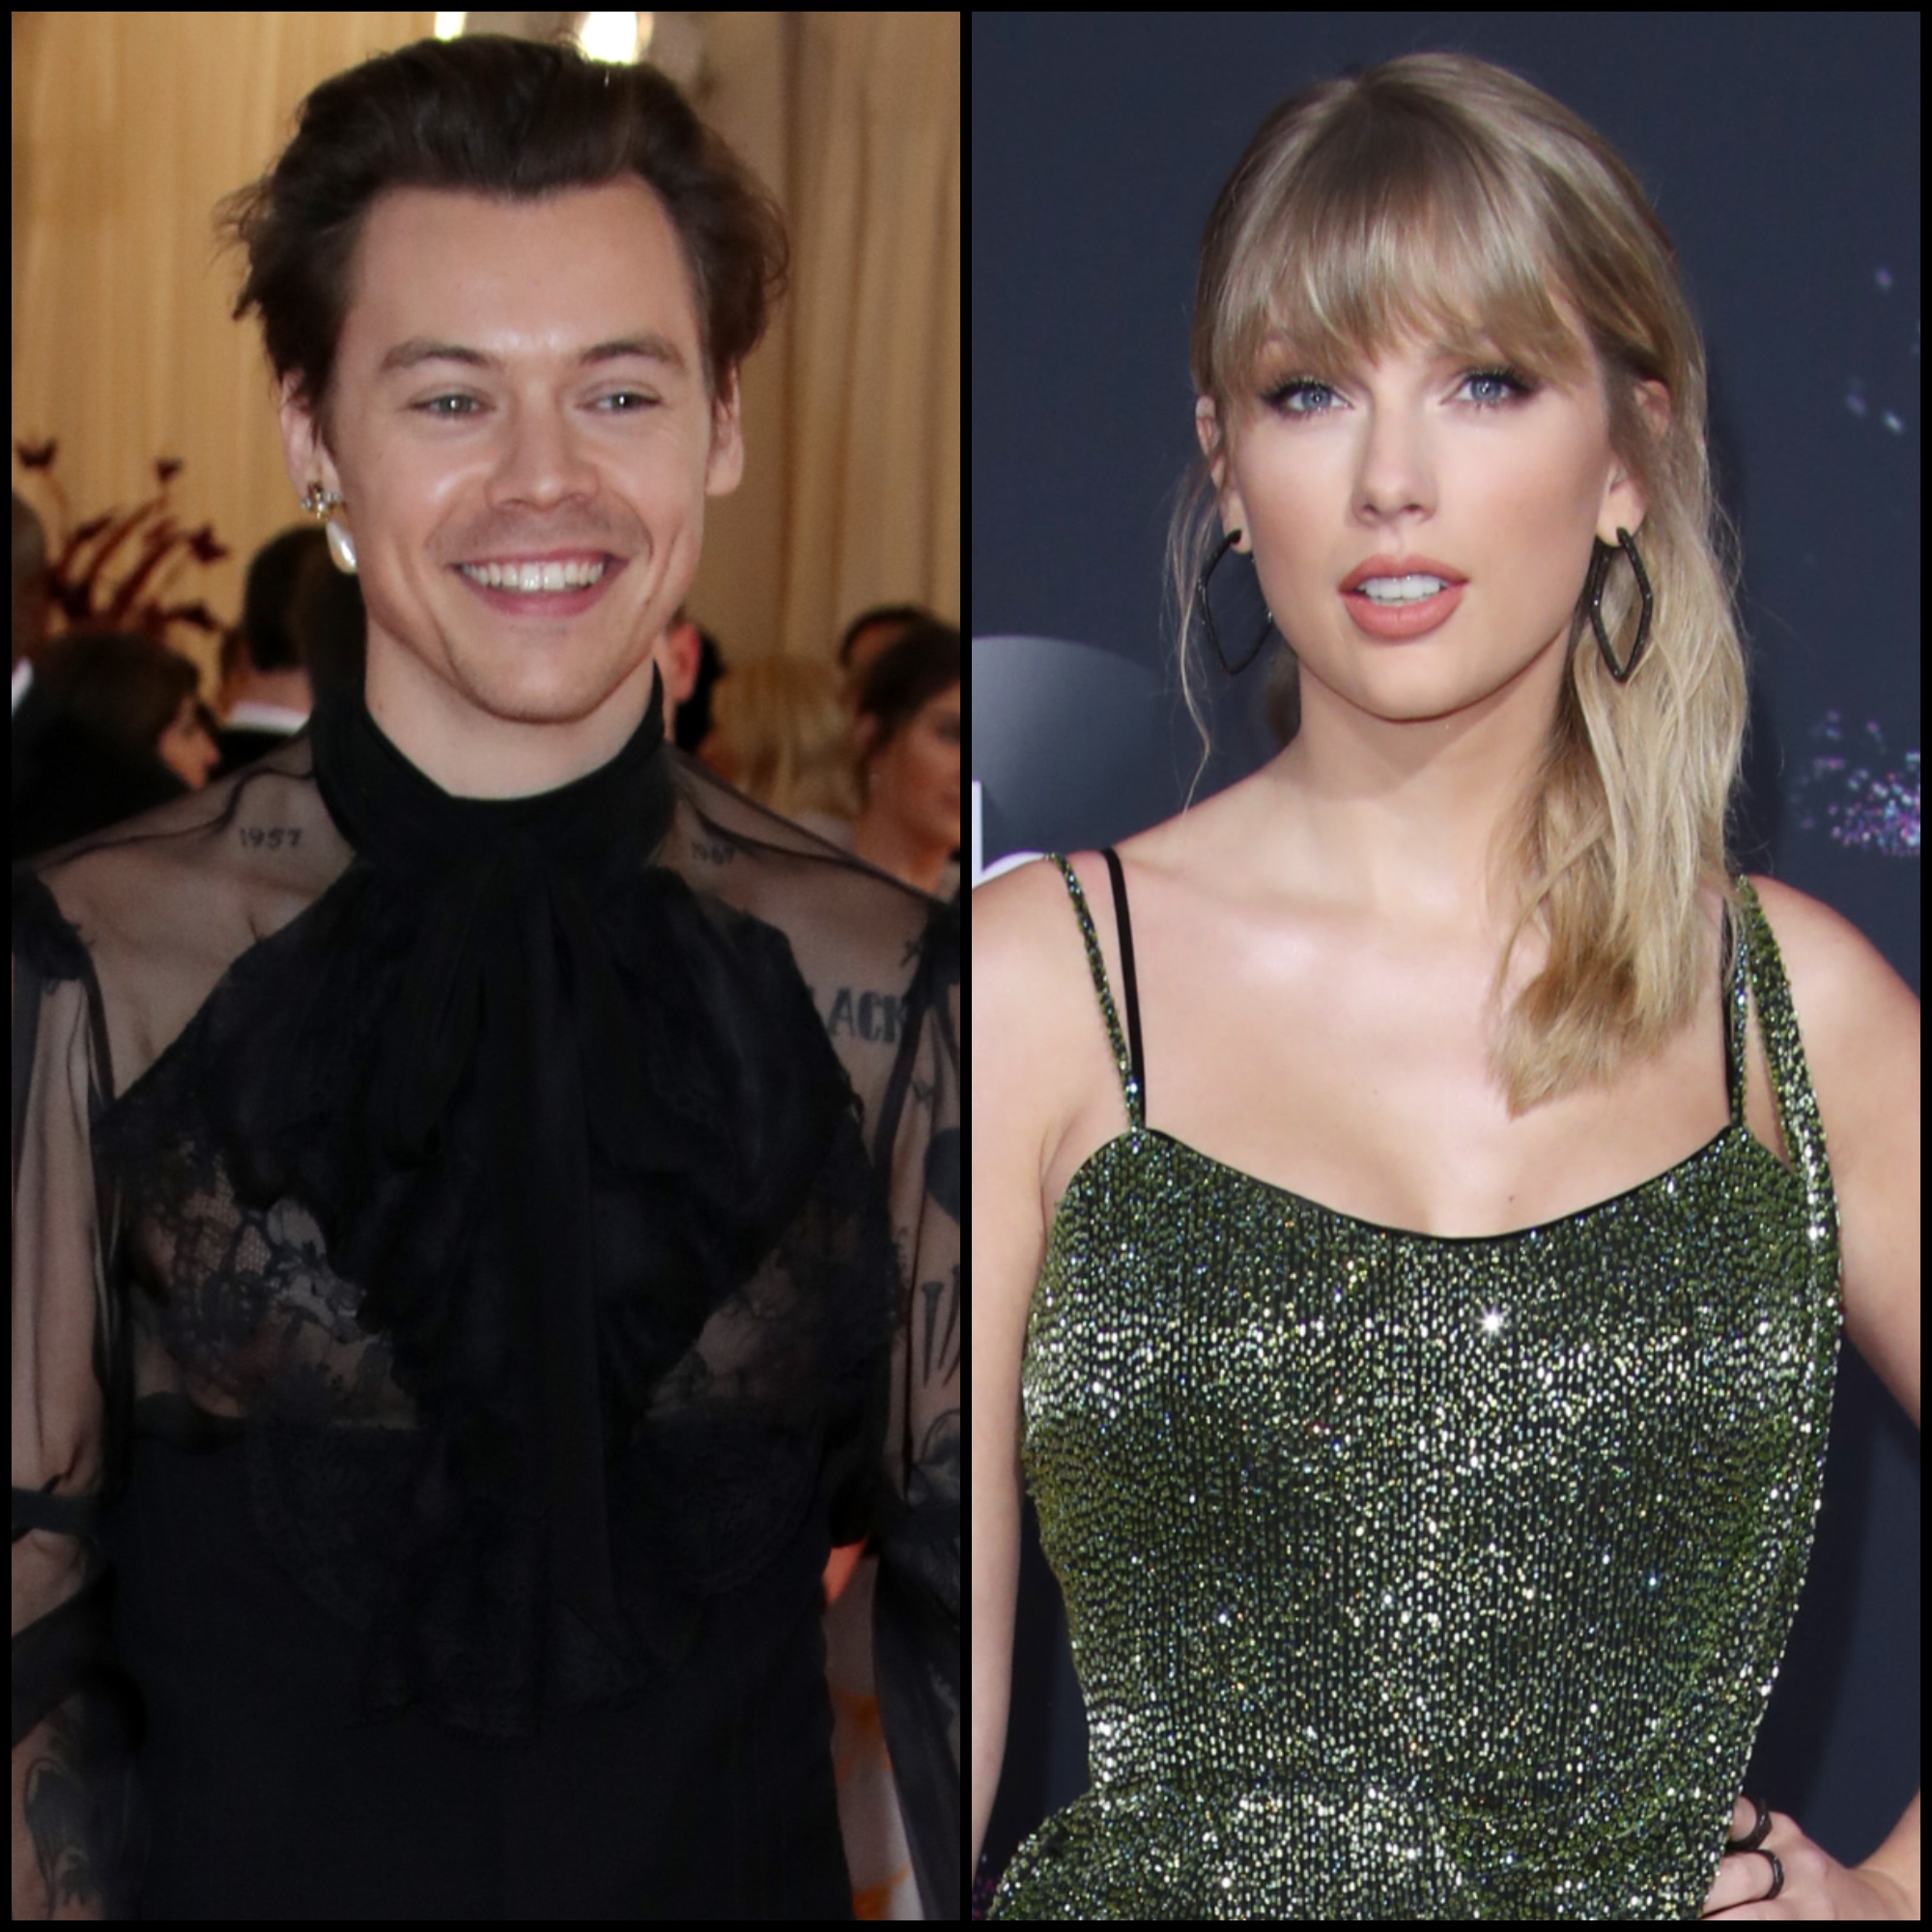 Harry Styles And Taylor Swift Release New Songs On Same Day